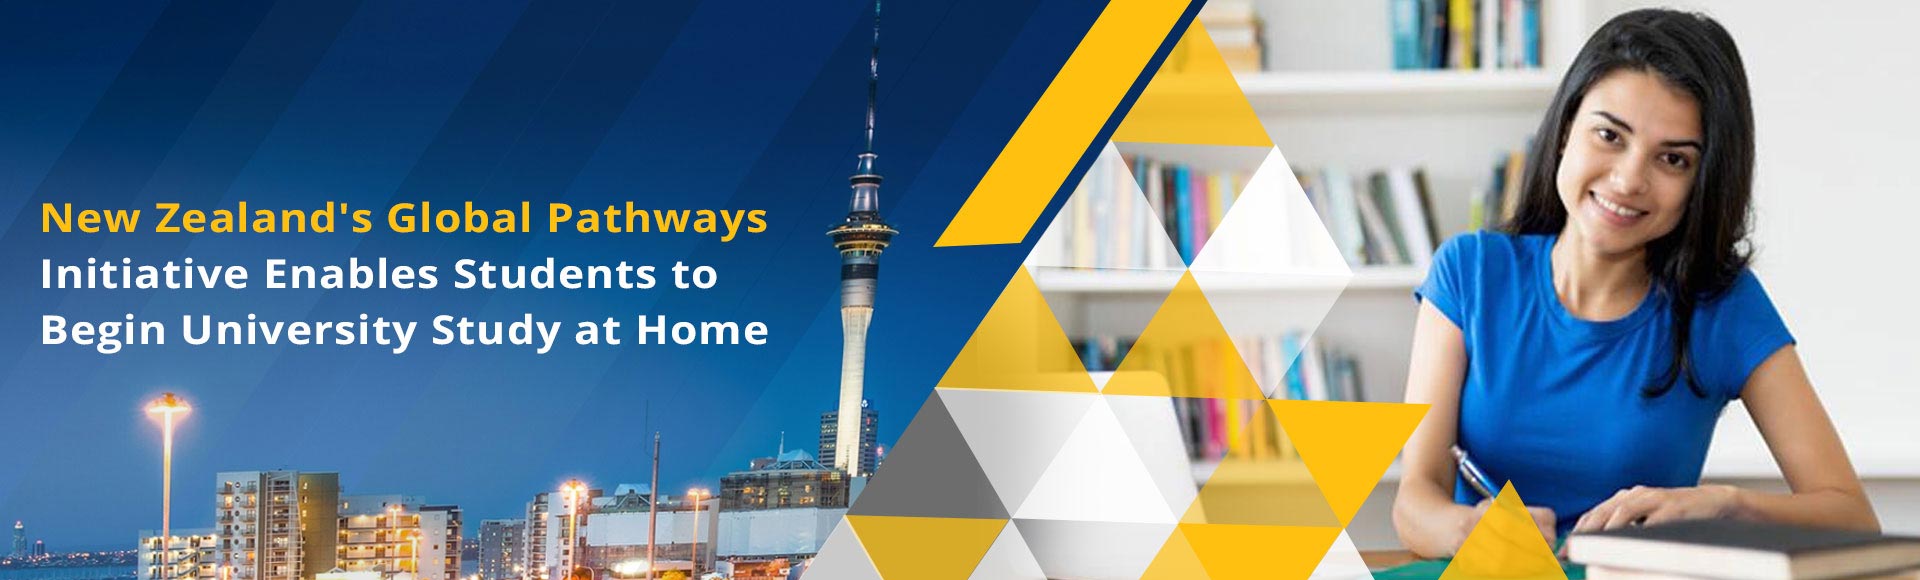 New Zealand’s Global Pathways initiative enables students to begin university study at home